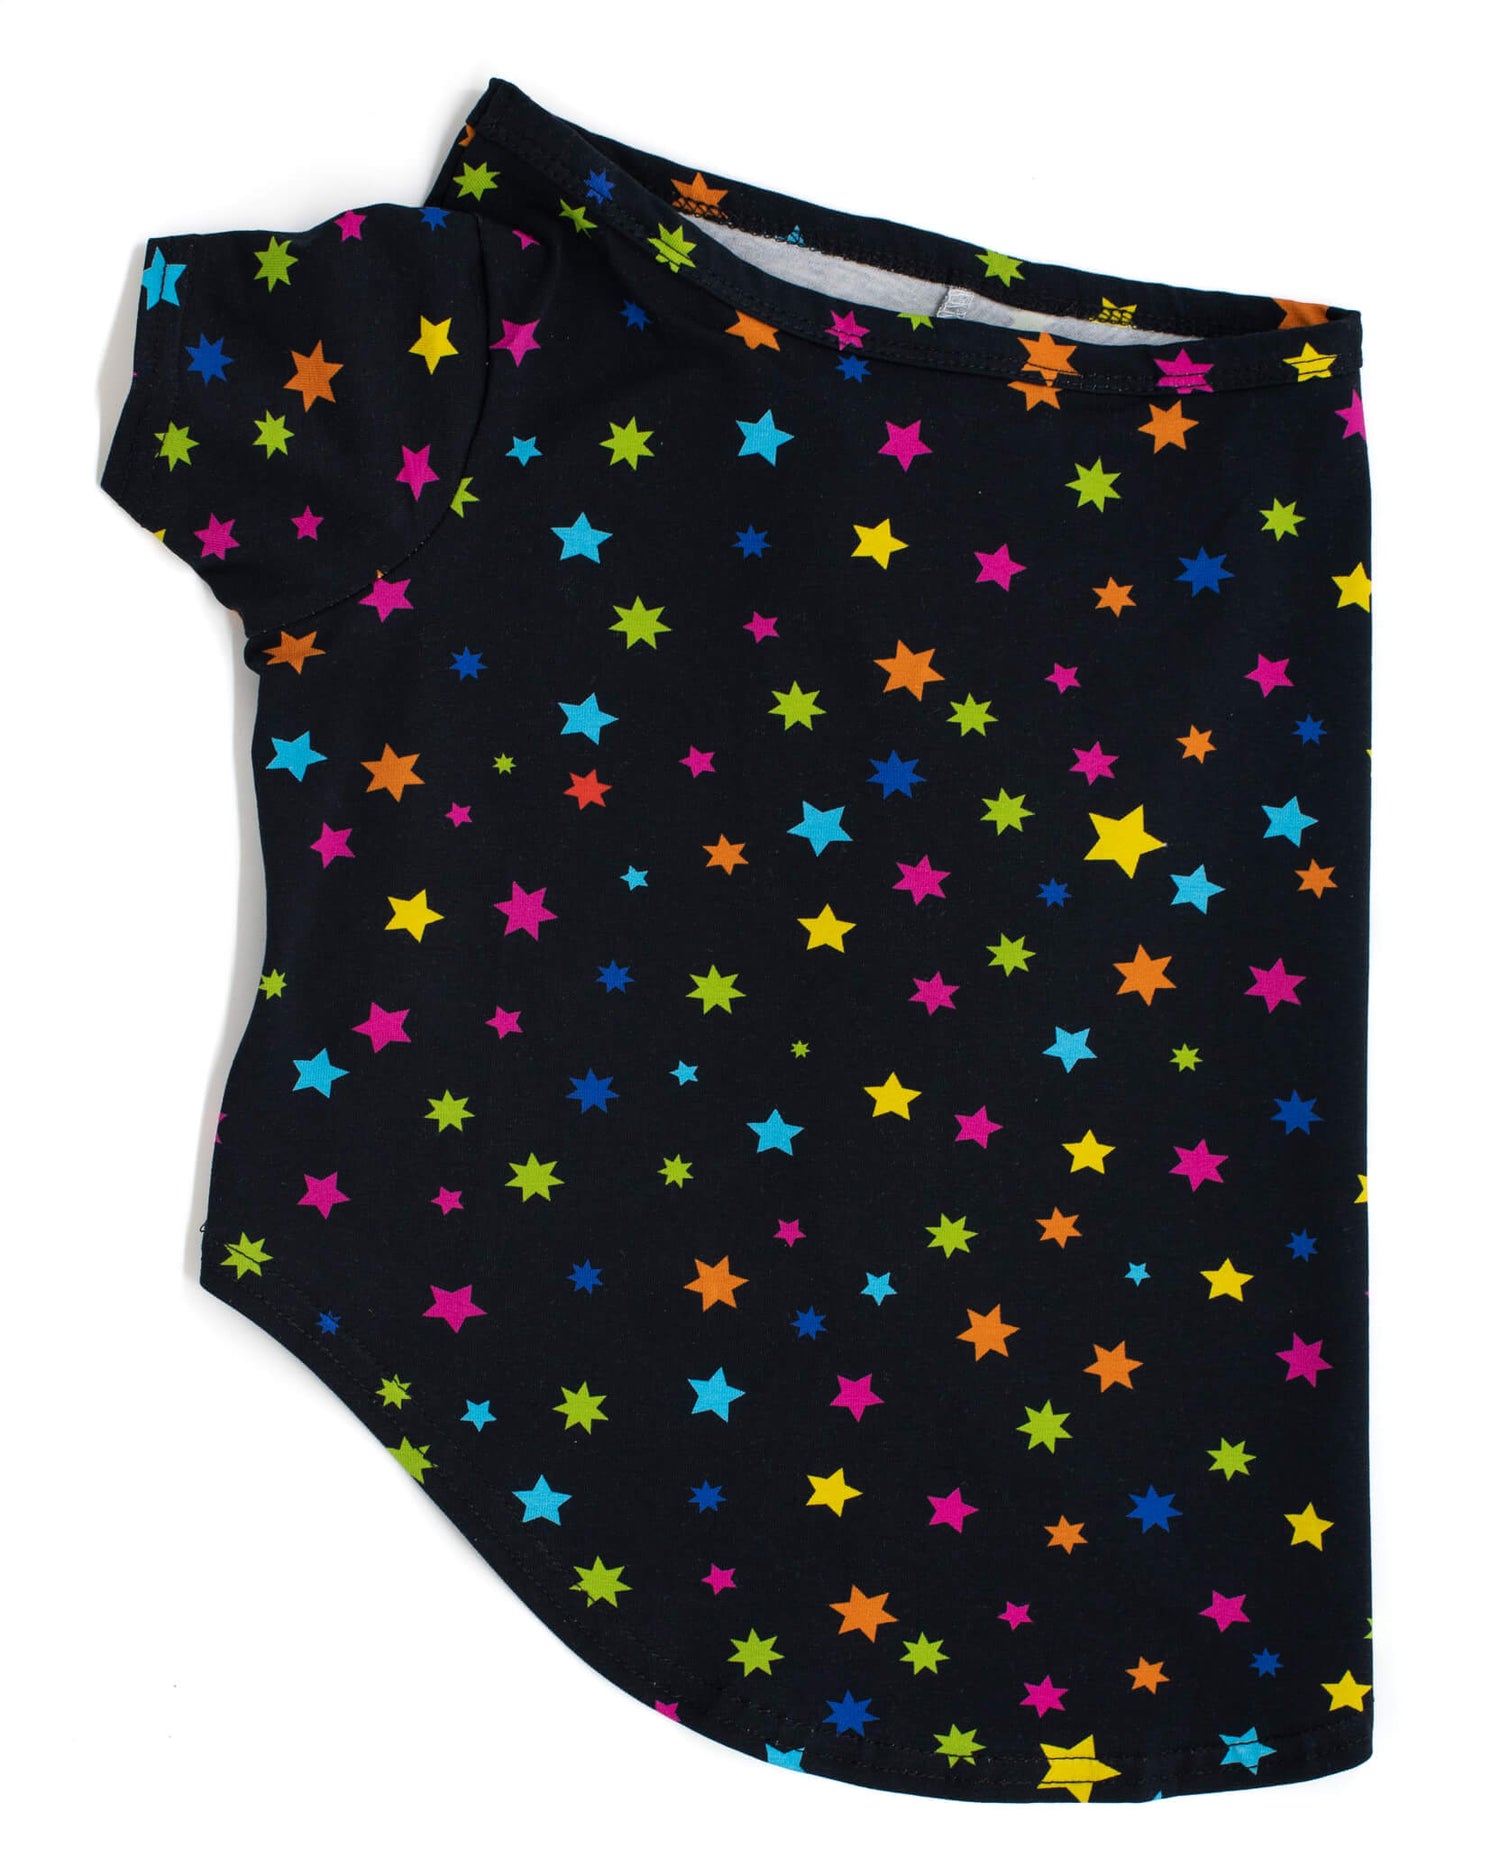 Side profile flat lay of star gazer dog shirt - black shirt with bright multi-colored stars - Discover the stylish star gazer shirt for dogs - Browse our collection of trendy dog shirts and clothing with captivating designs.